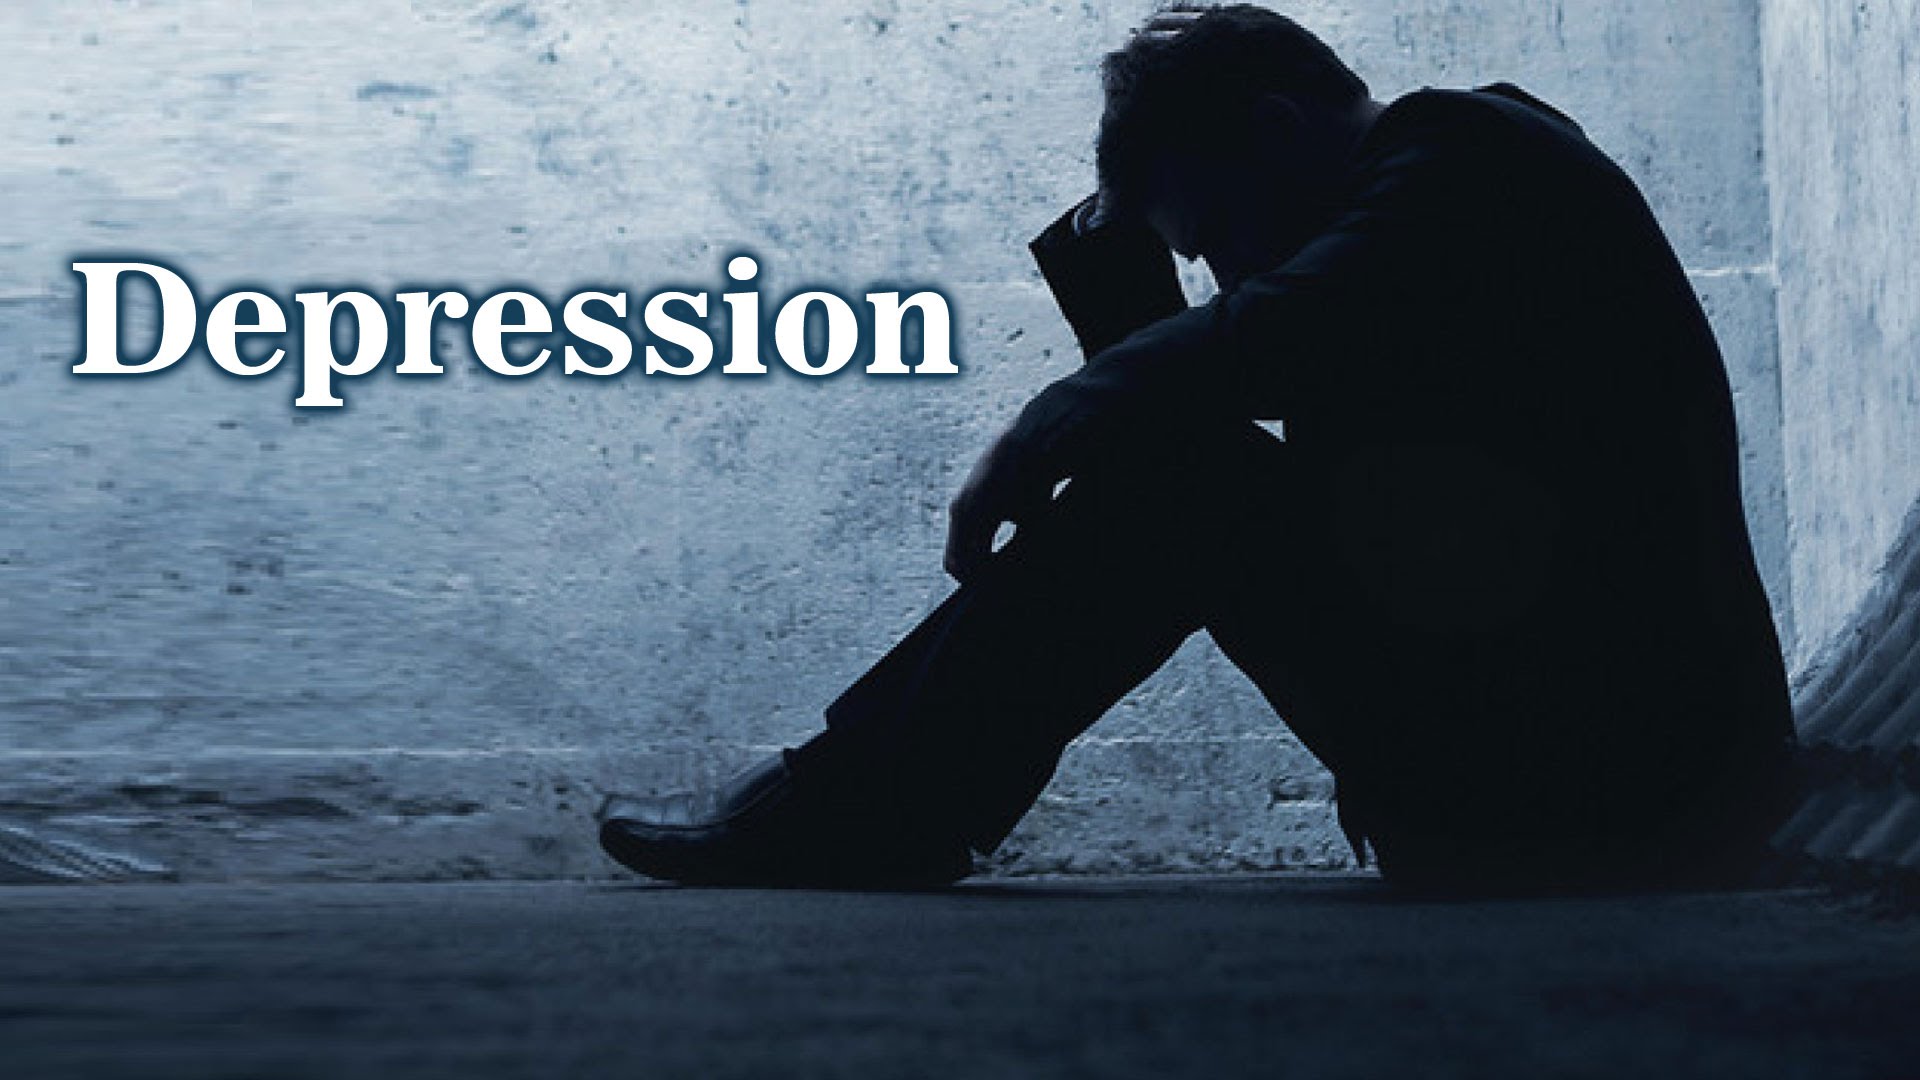 In this blog I'll give you a guide on how you can beat depression without a therapy session. This guide will help you through difficult times.